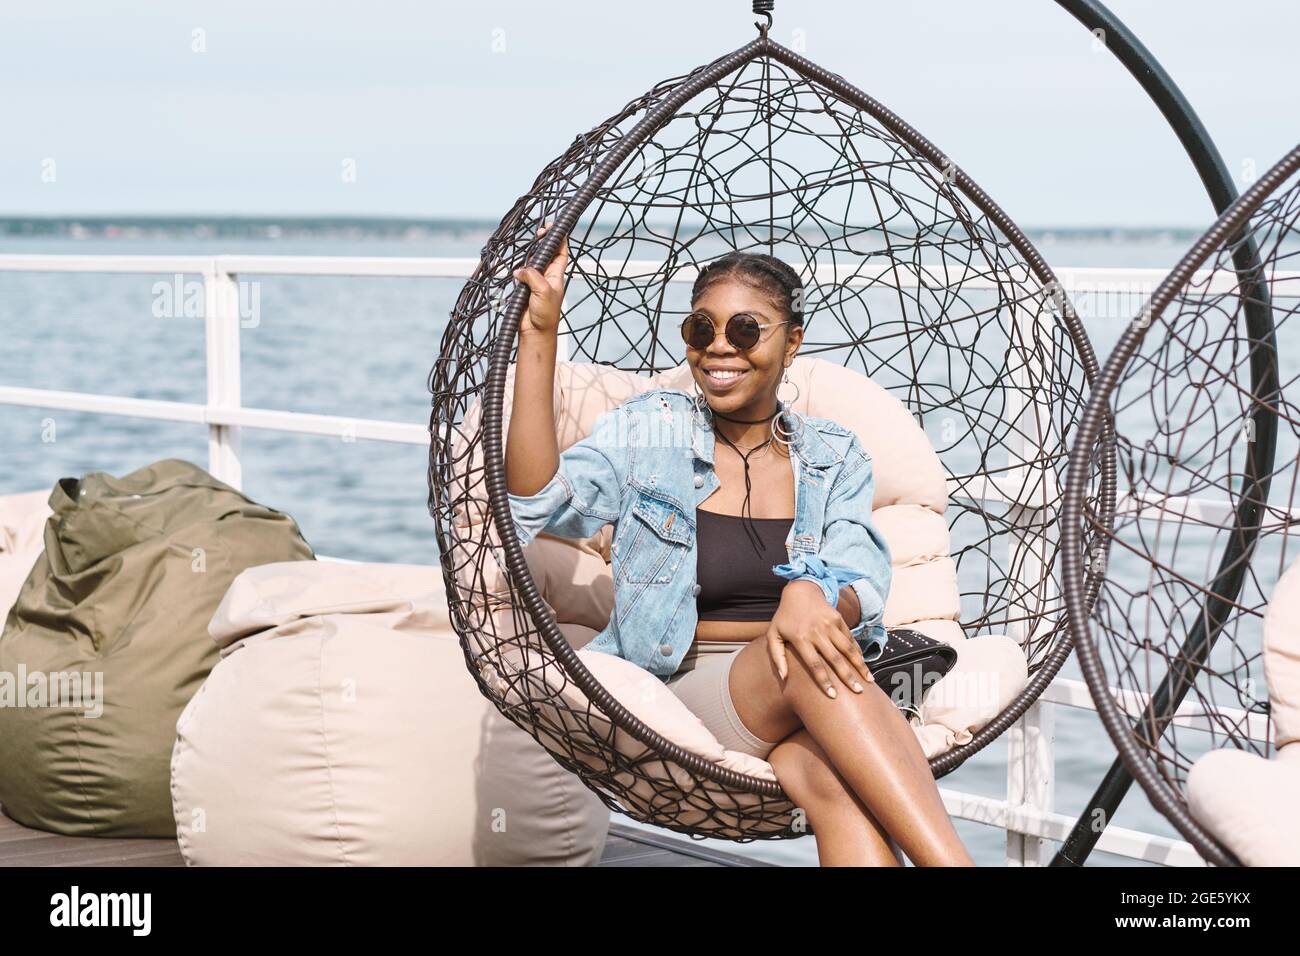 Portrait of attractive smiling young woman in sunglasses relaxing in hanging chair outdoors at party Stock Photo